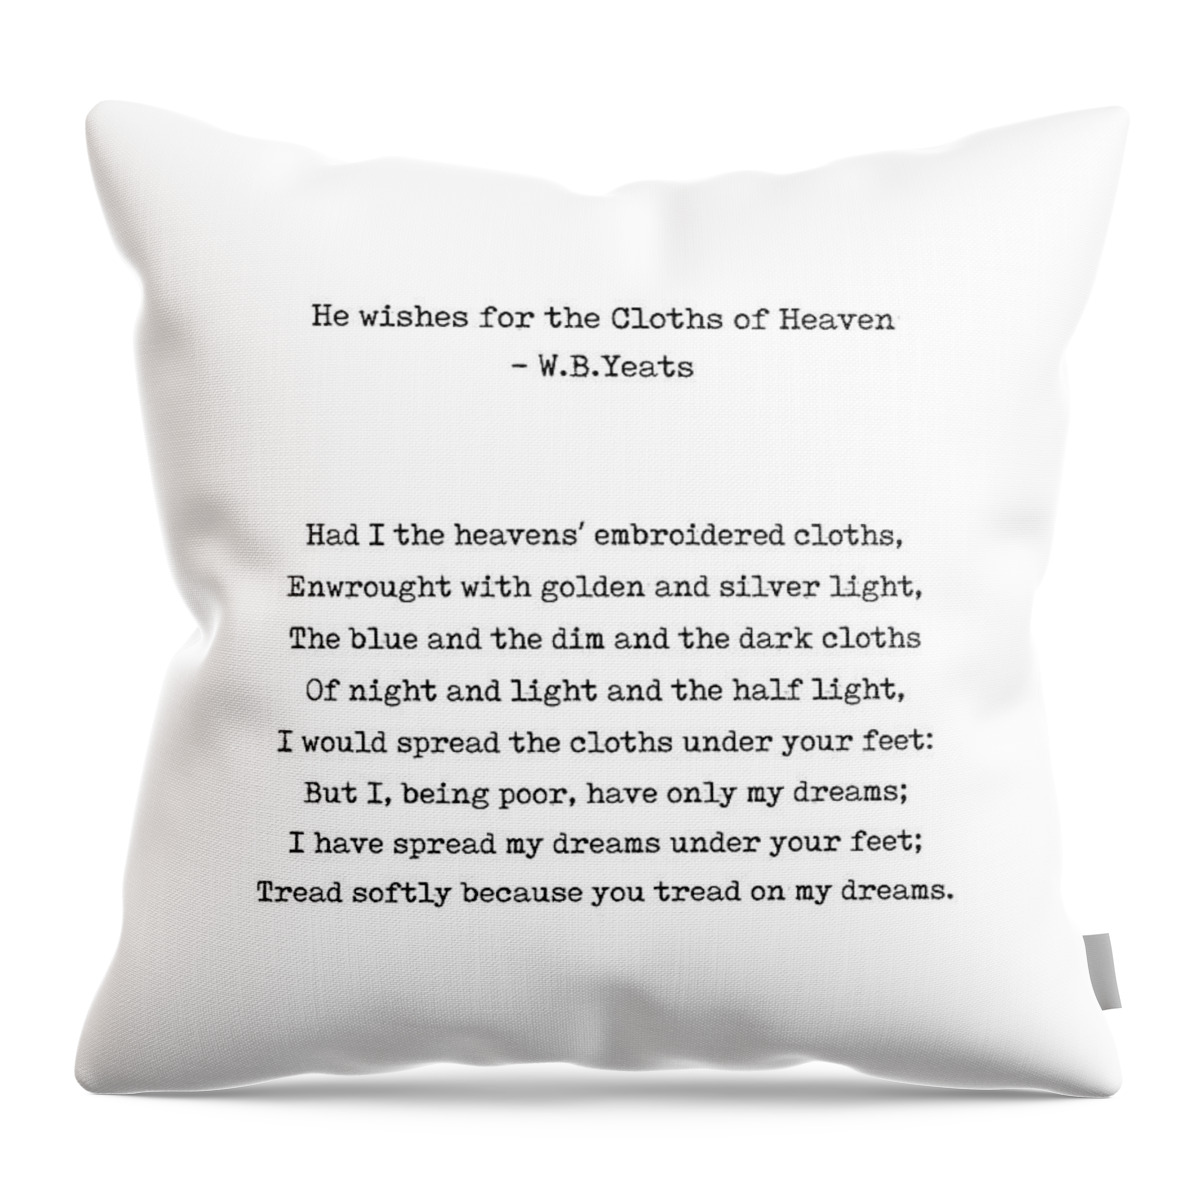 Cloths Of Heaven Throw Pillow featuring the digital art He Wishes for the Cloths of Heaven - William Butler Yeats Poem - Typewriter Print - Literature by Studio Grafiikka